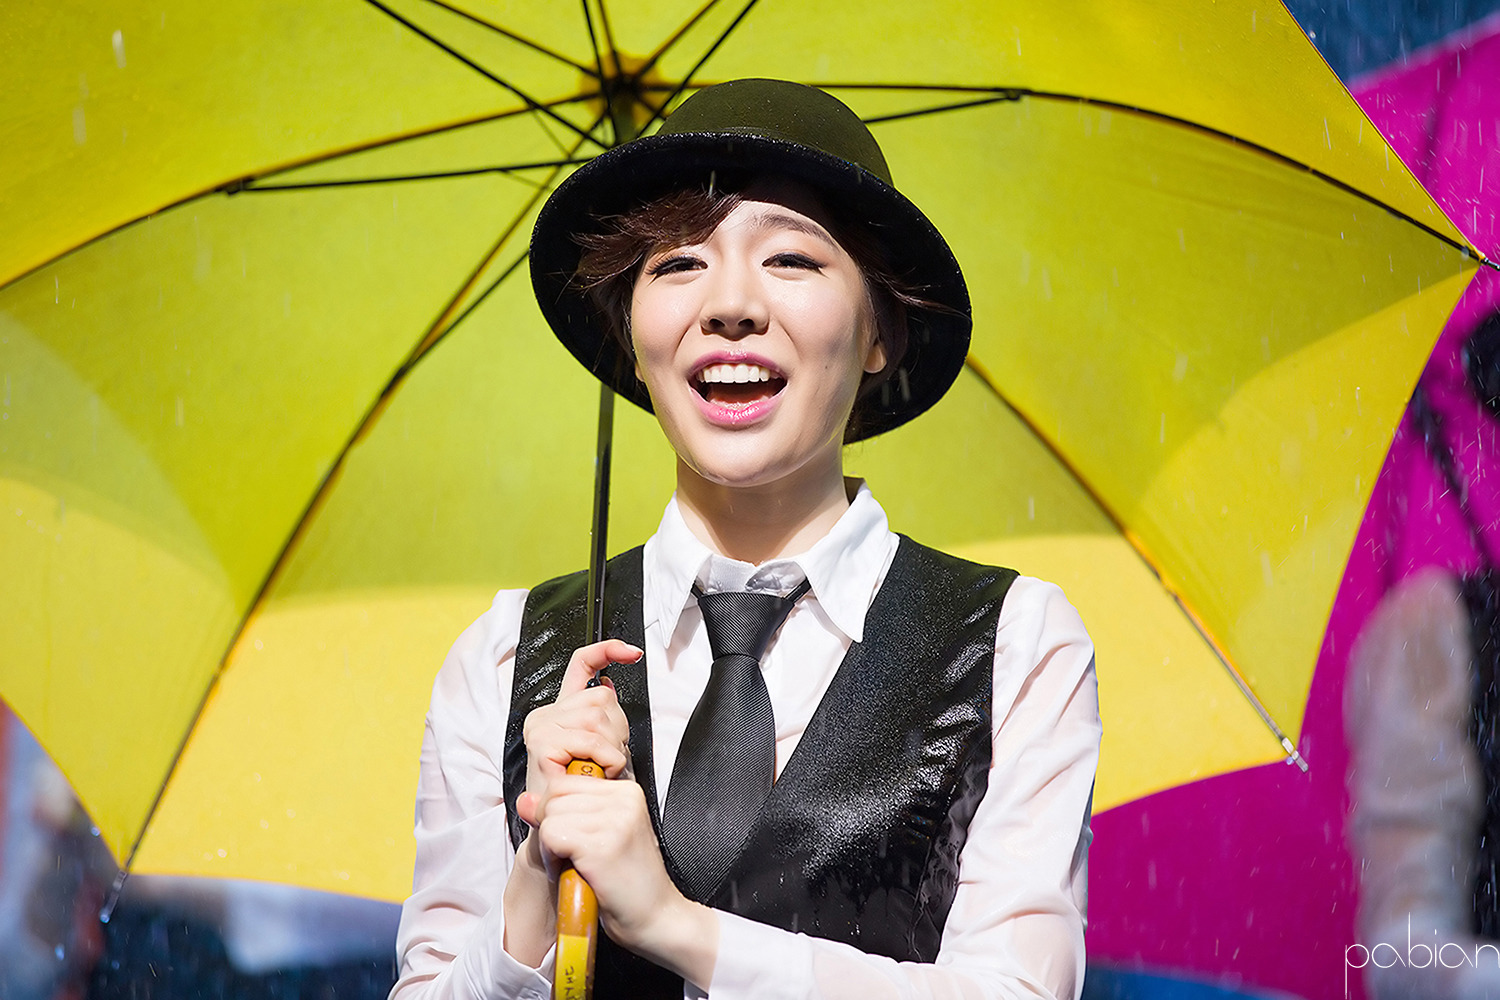 [OTHER][29-04-2014]Sunny sẽ tham gia vở nhạc kịch "SINGIN' IN THE RAIN" - Page 2 2264A347539E71520E75A8